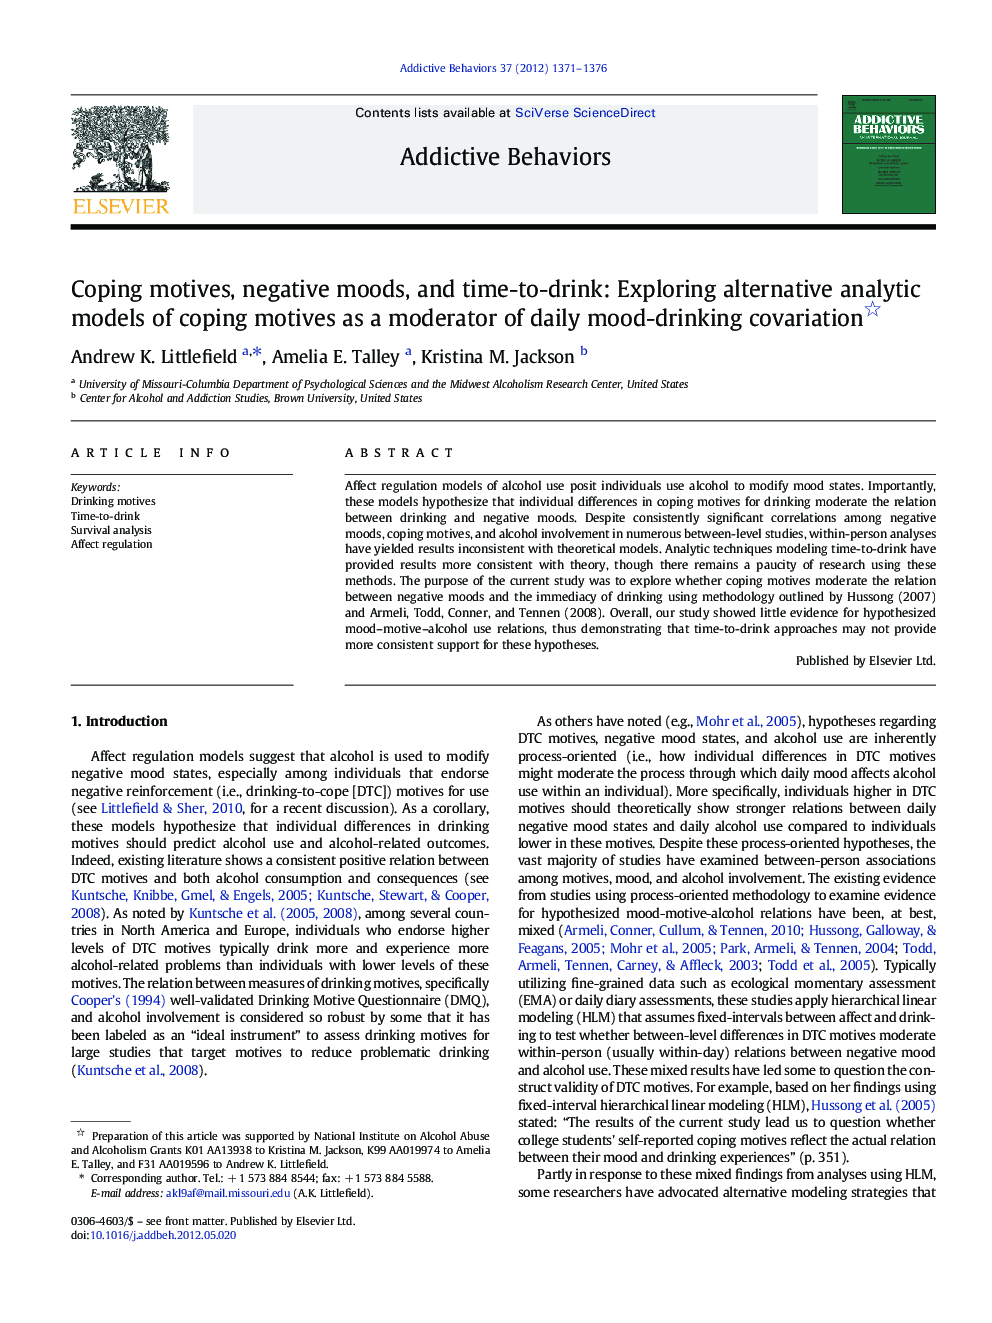 Coping motives, negative moods, and time-to-drink: Exploring alternative analytic models of coping motives as a moderator of daily mood-drinking covariation 